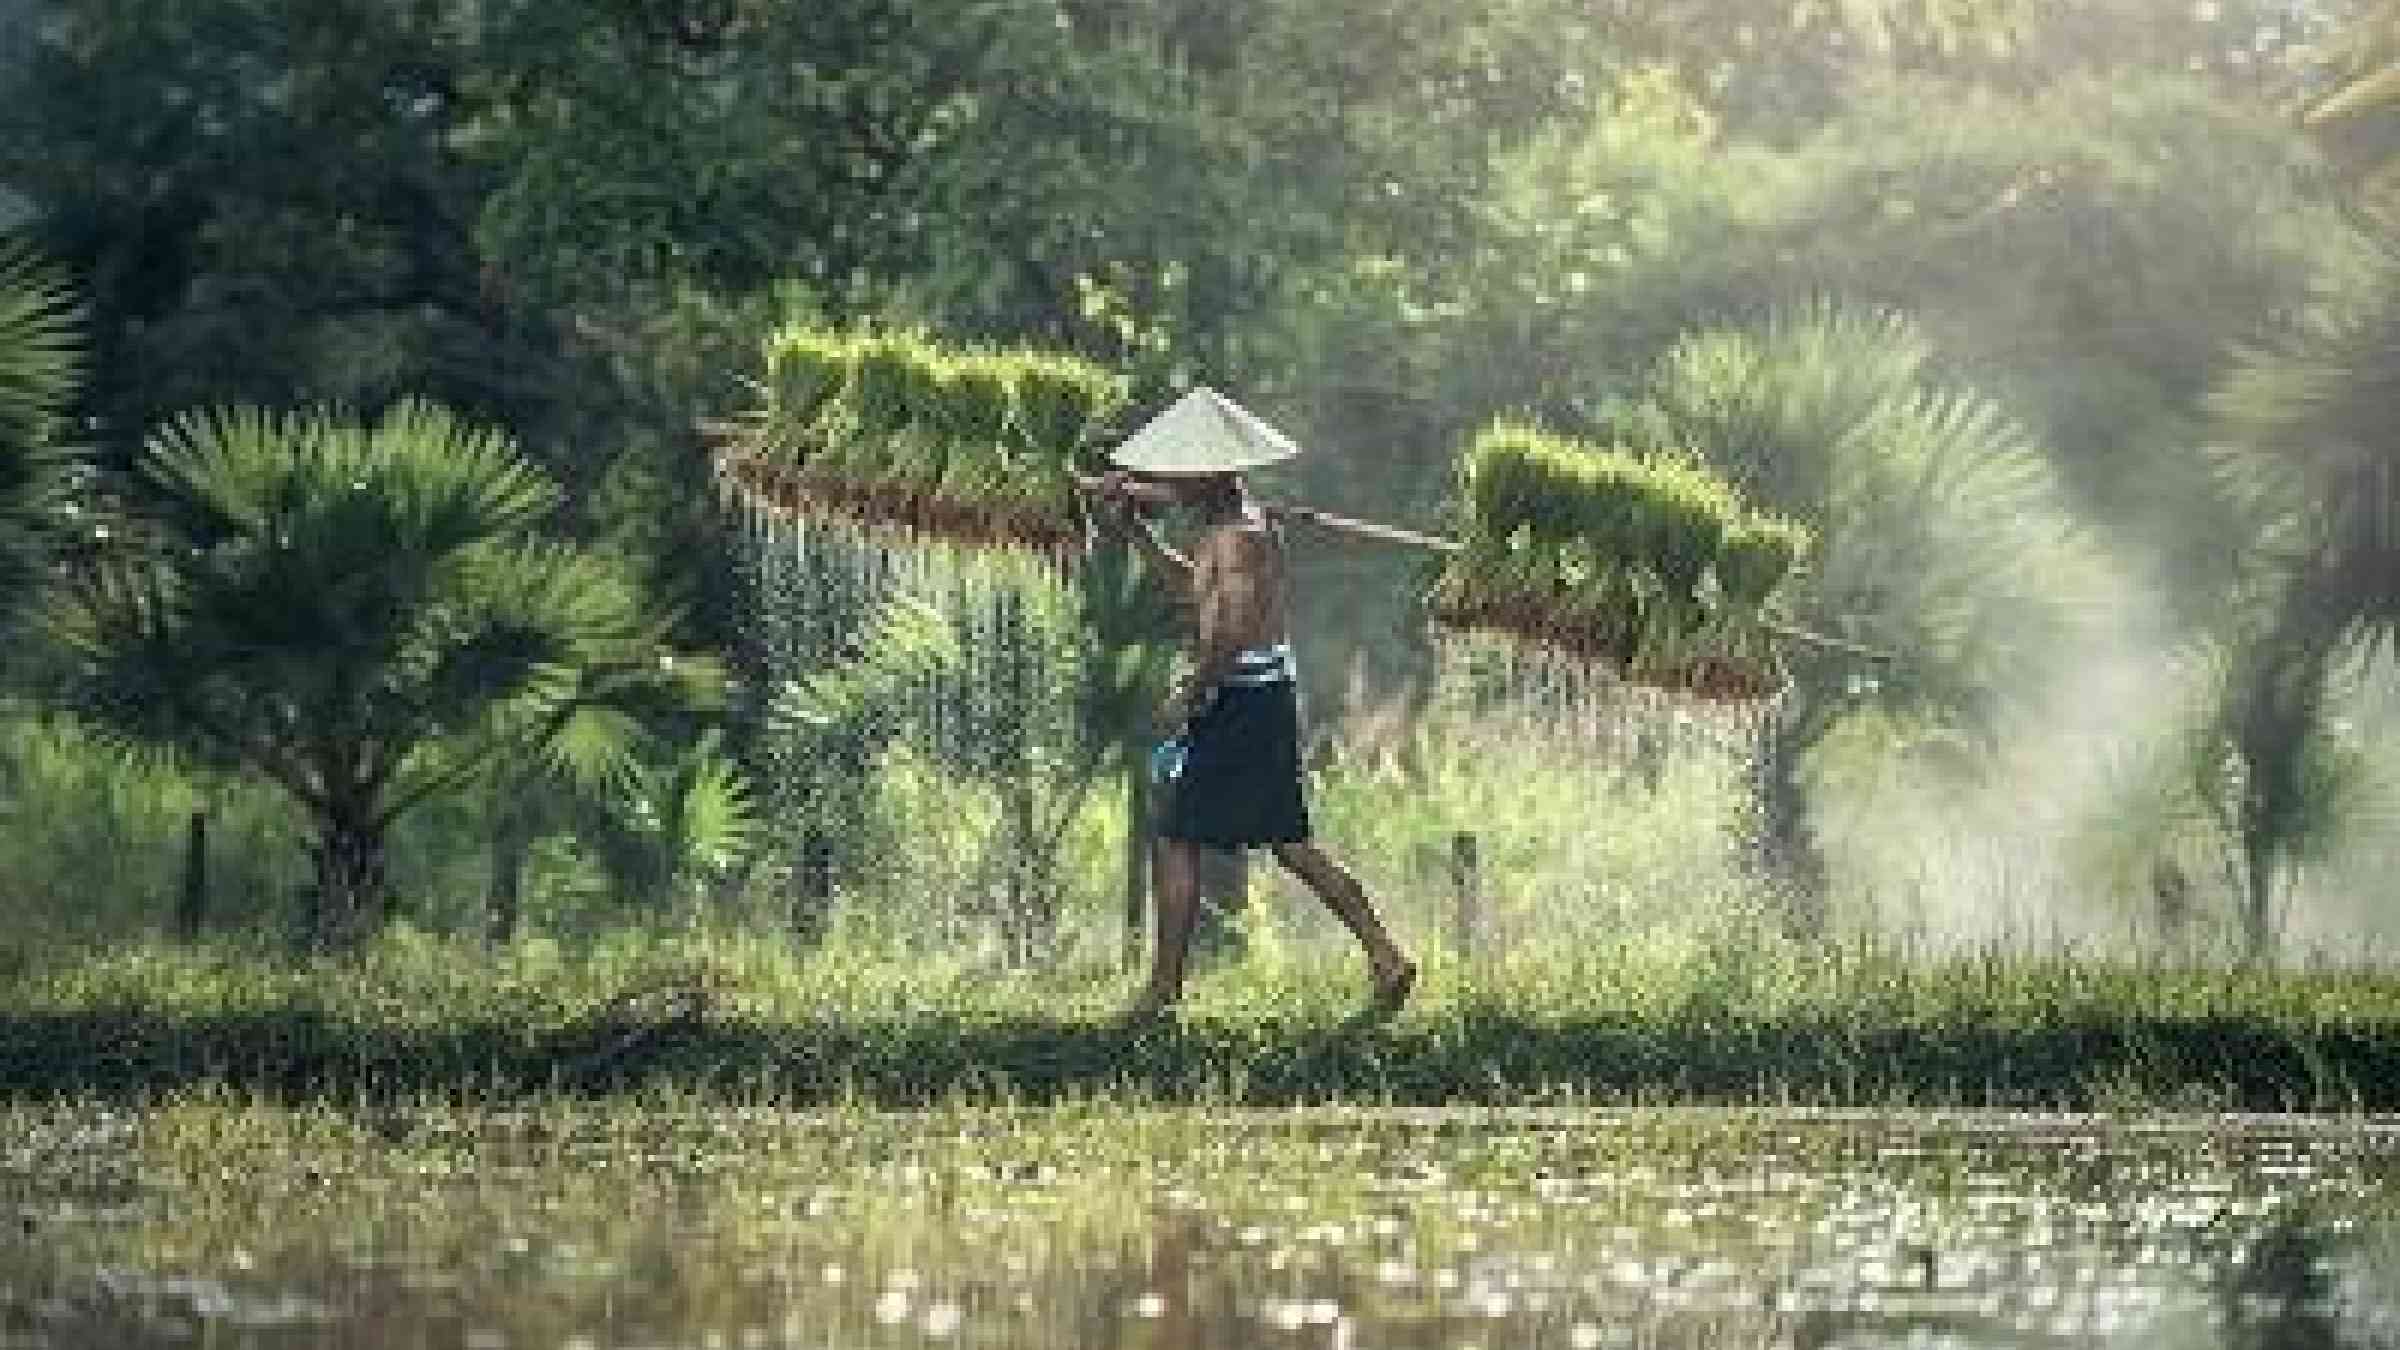 Rice is the predominant crop in Cambodia and most rice fields are rain-fed and thus vulnerable to climate change (source: Max Pixel)